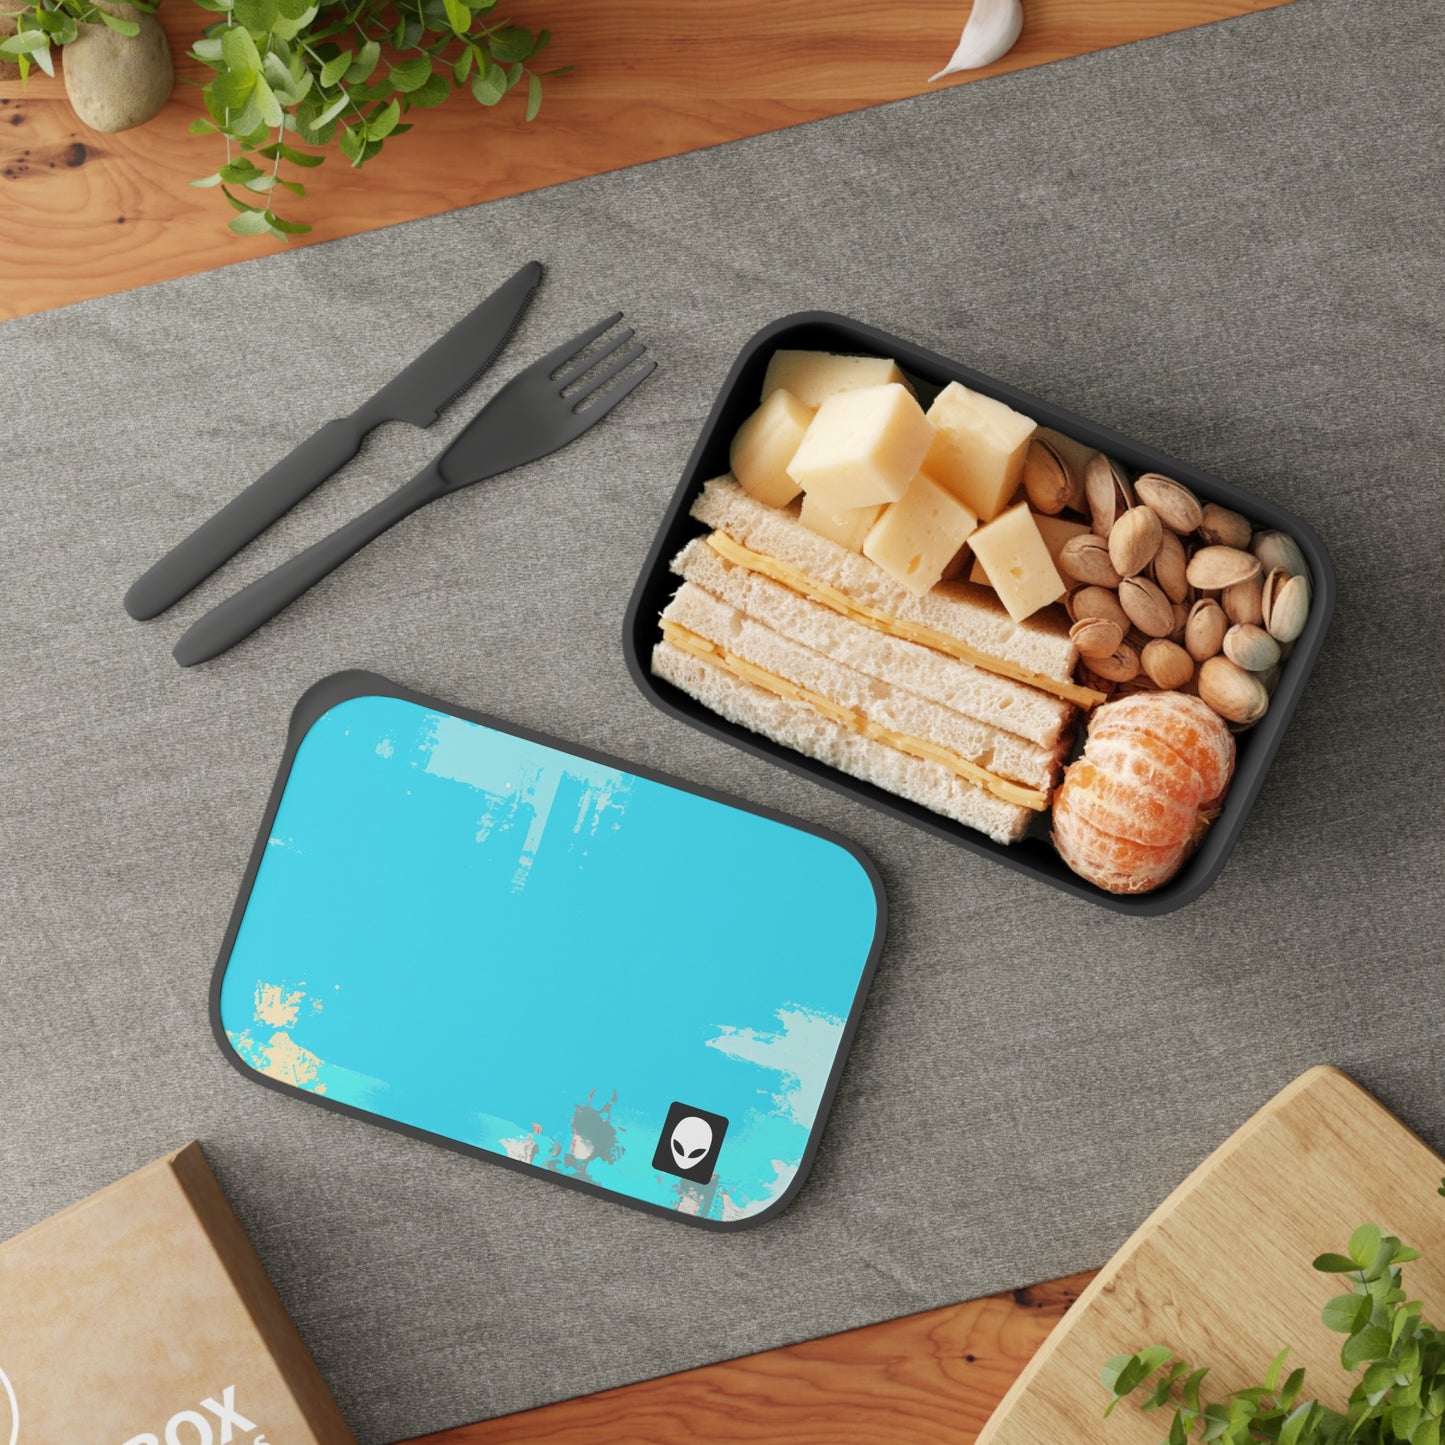 "A Breezy Skyscape: A Combination of Tradition and Modernity" - The Alien Eco-friendly PLA Bento Box with Band and Utensils